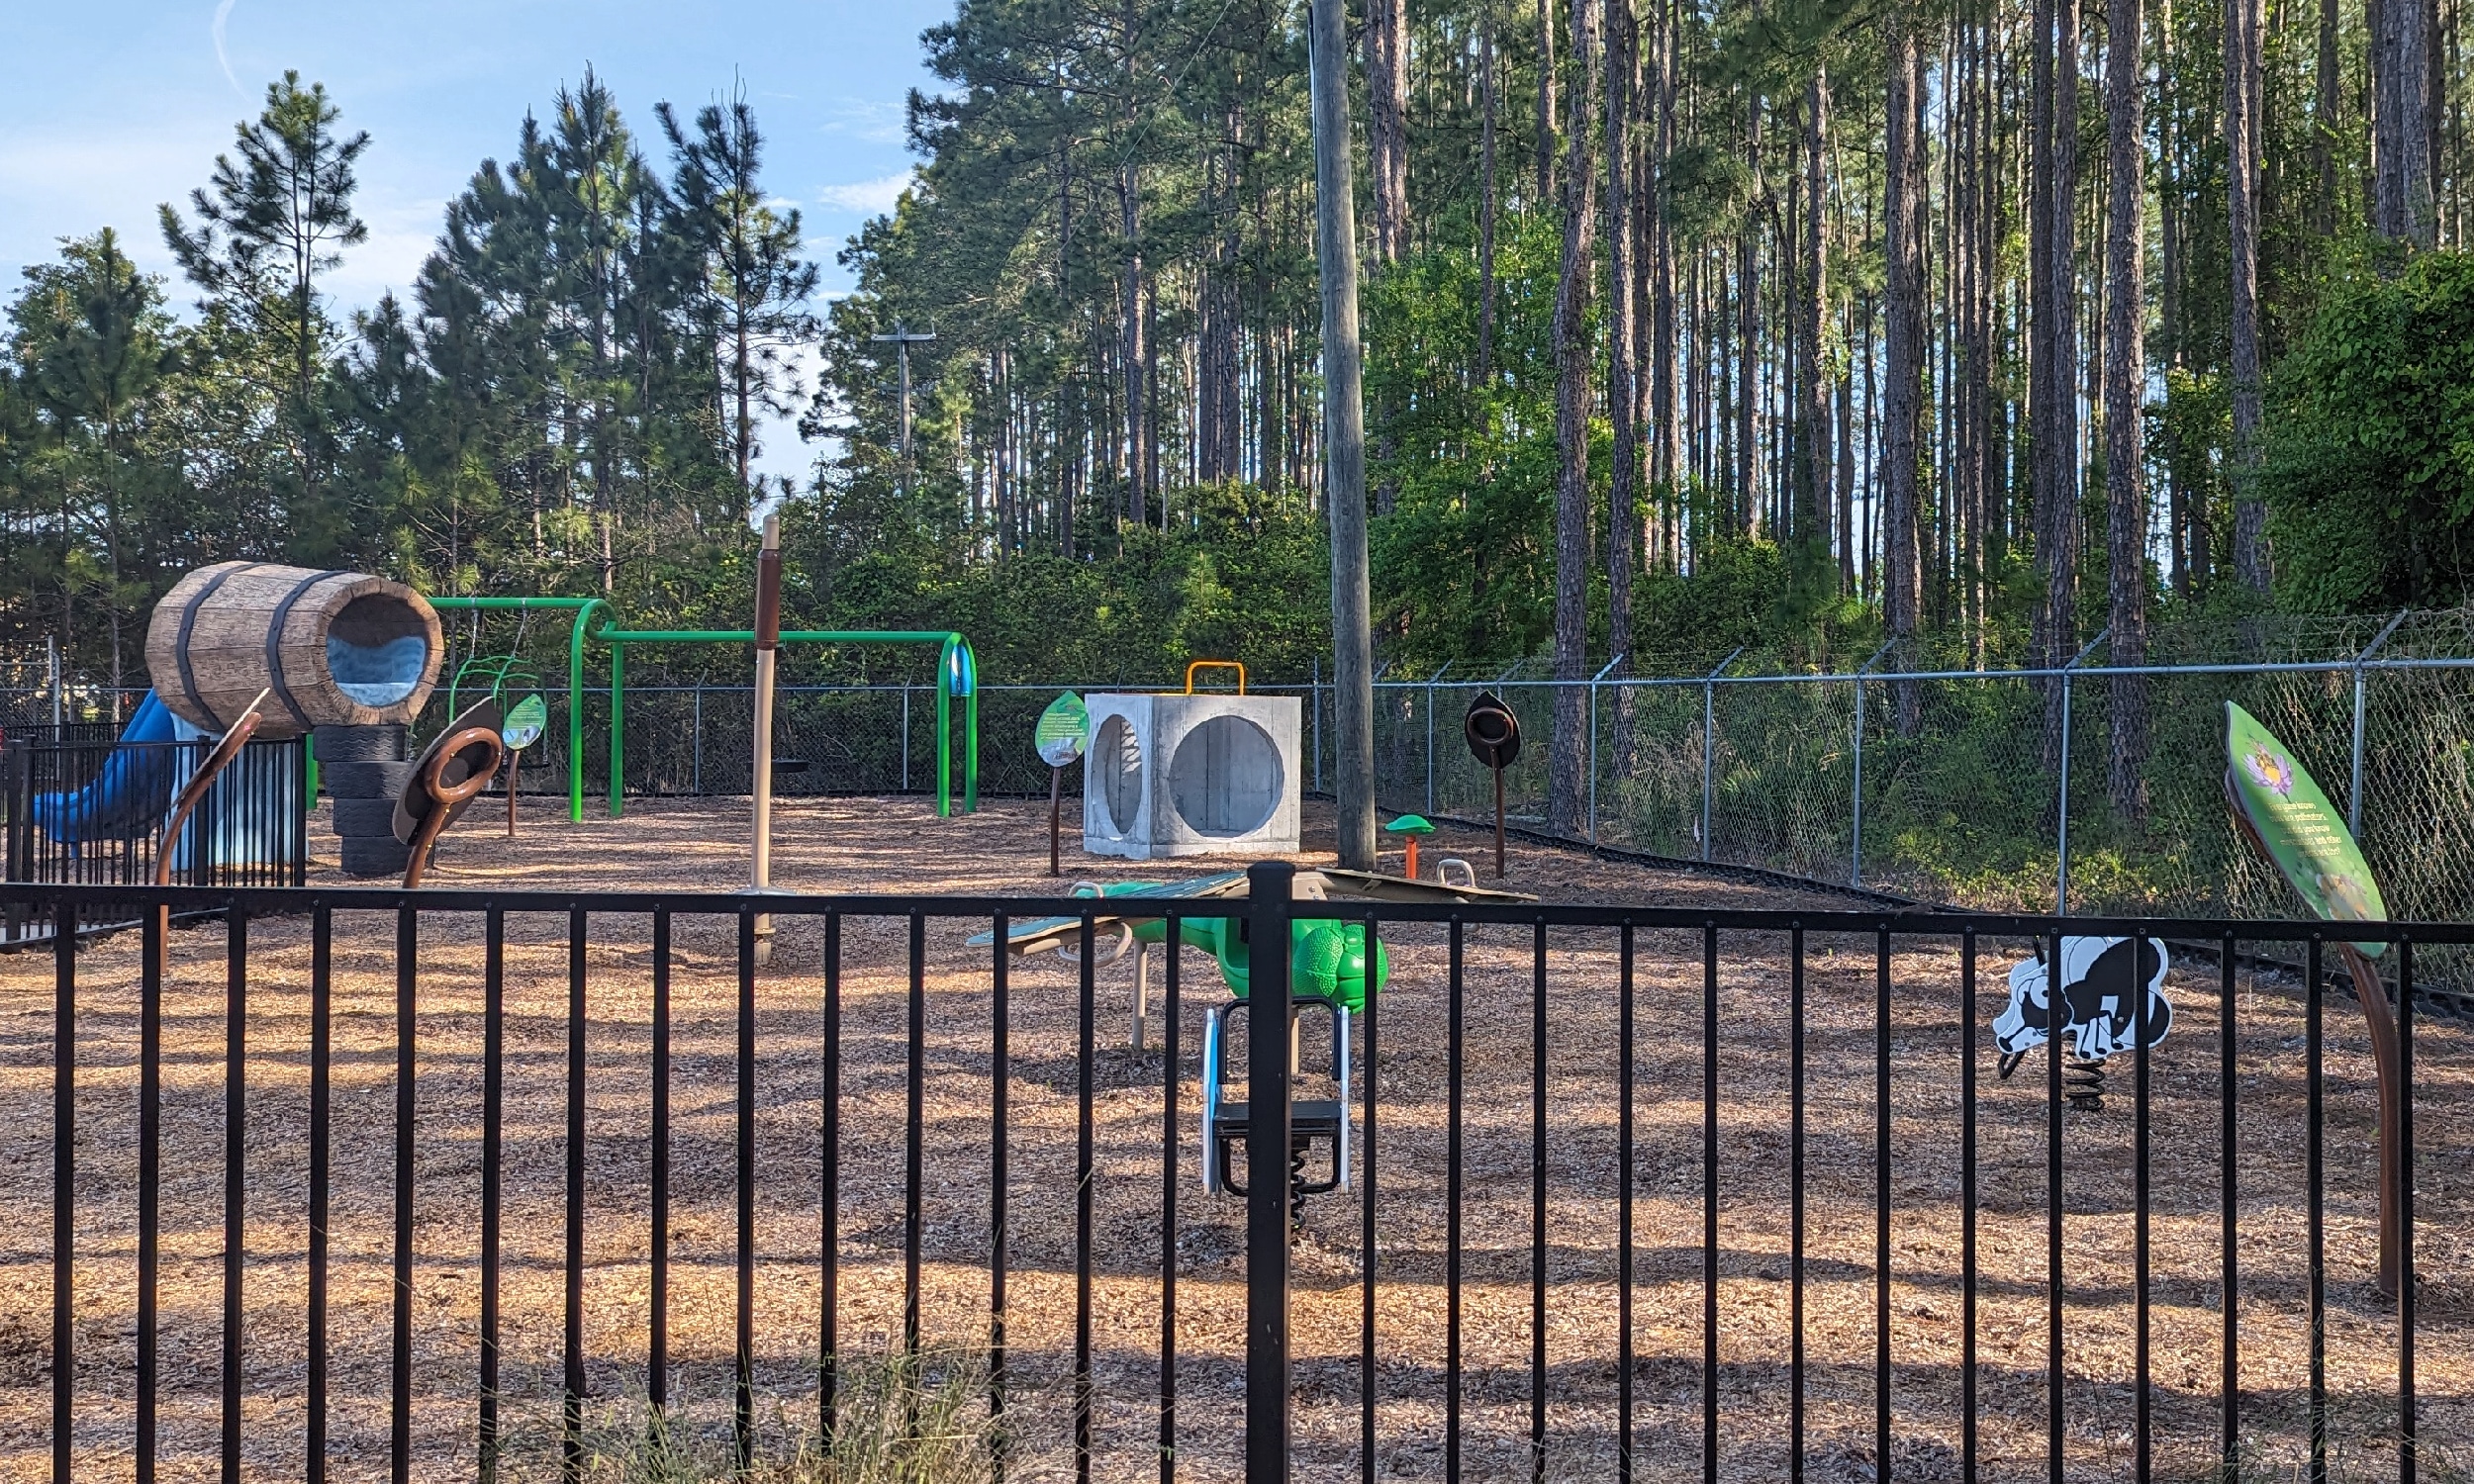 A playground near a stand of trees, is fenced in and covered in wood mulch